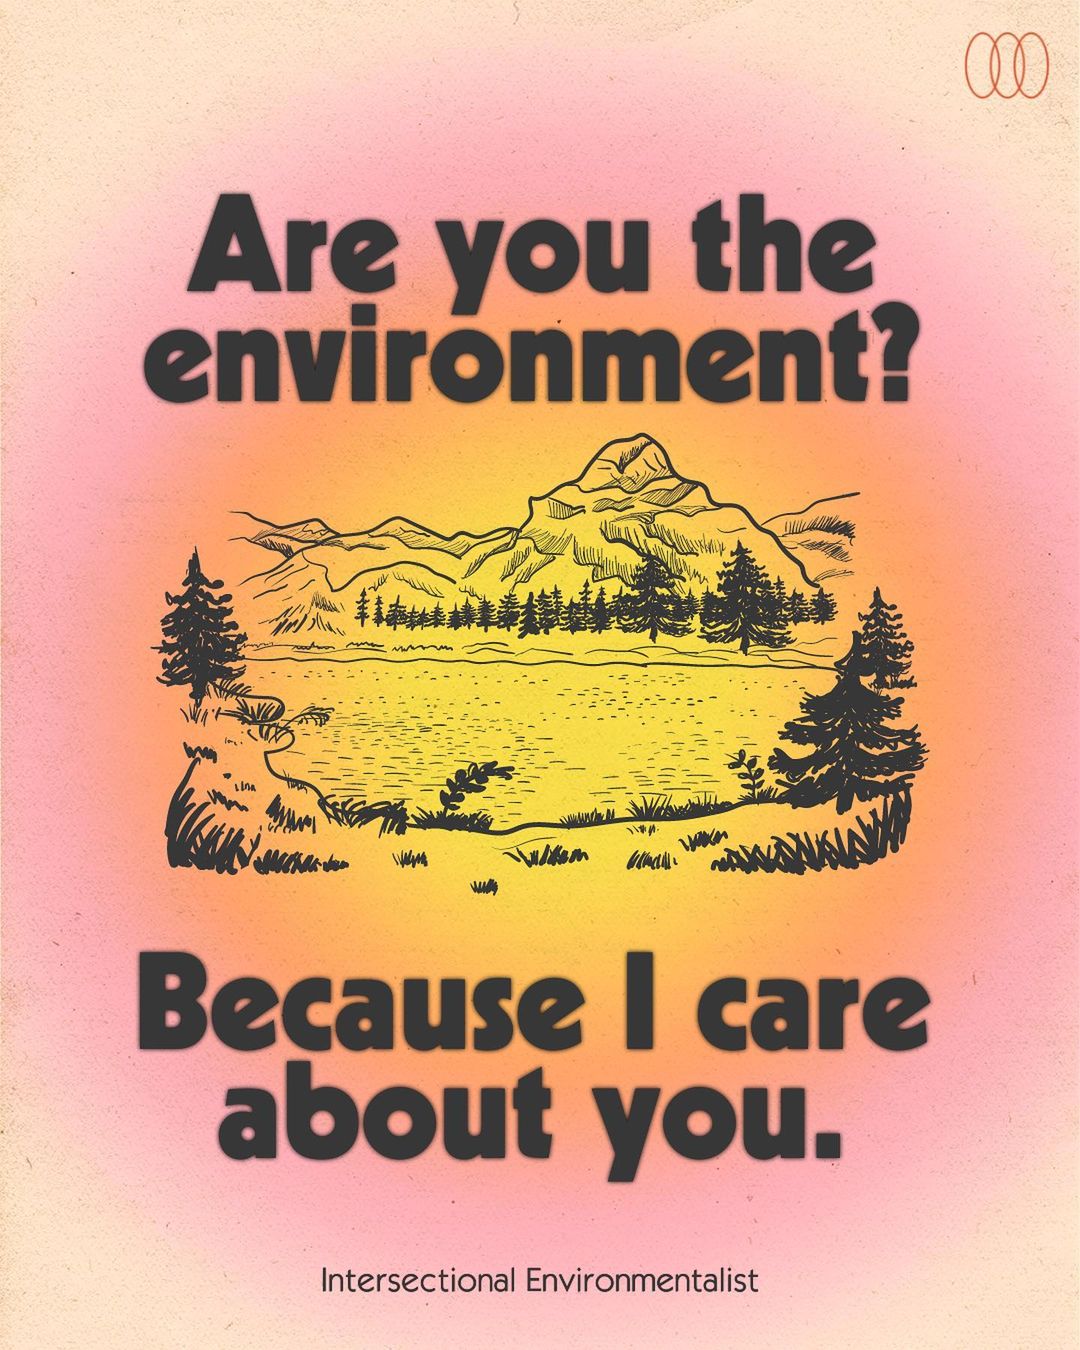 Are you the environment? Because I care about you. Valentine's Day graphic by Intersectional Environmentalist (@intersectionalenvironmentalist)